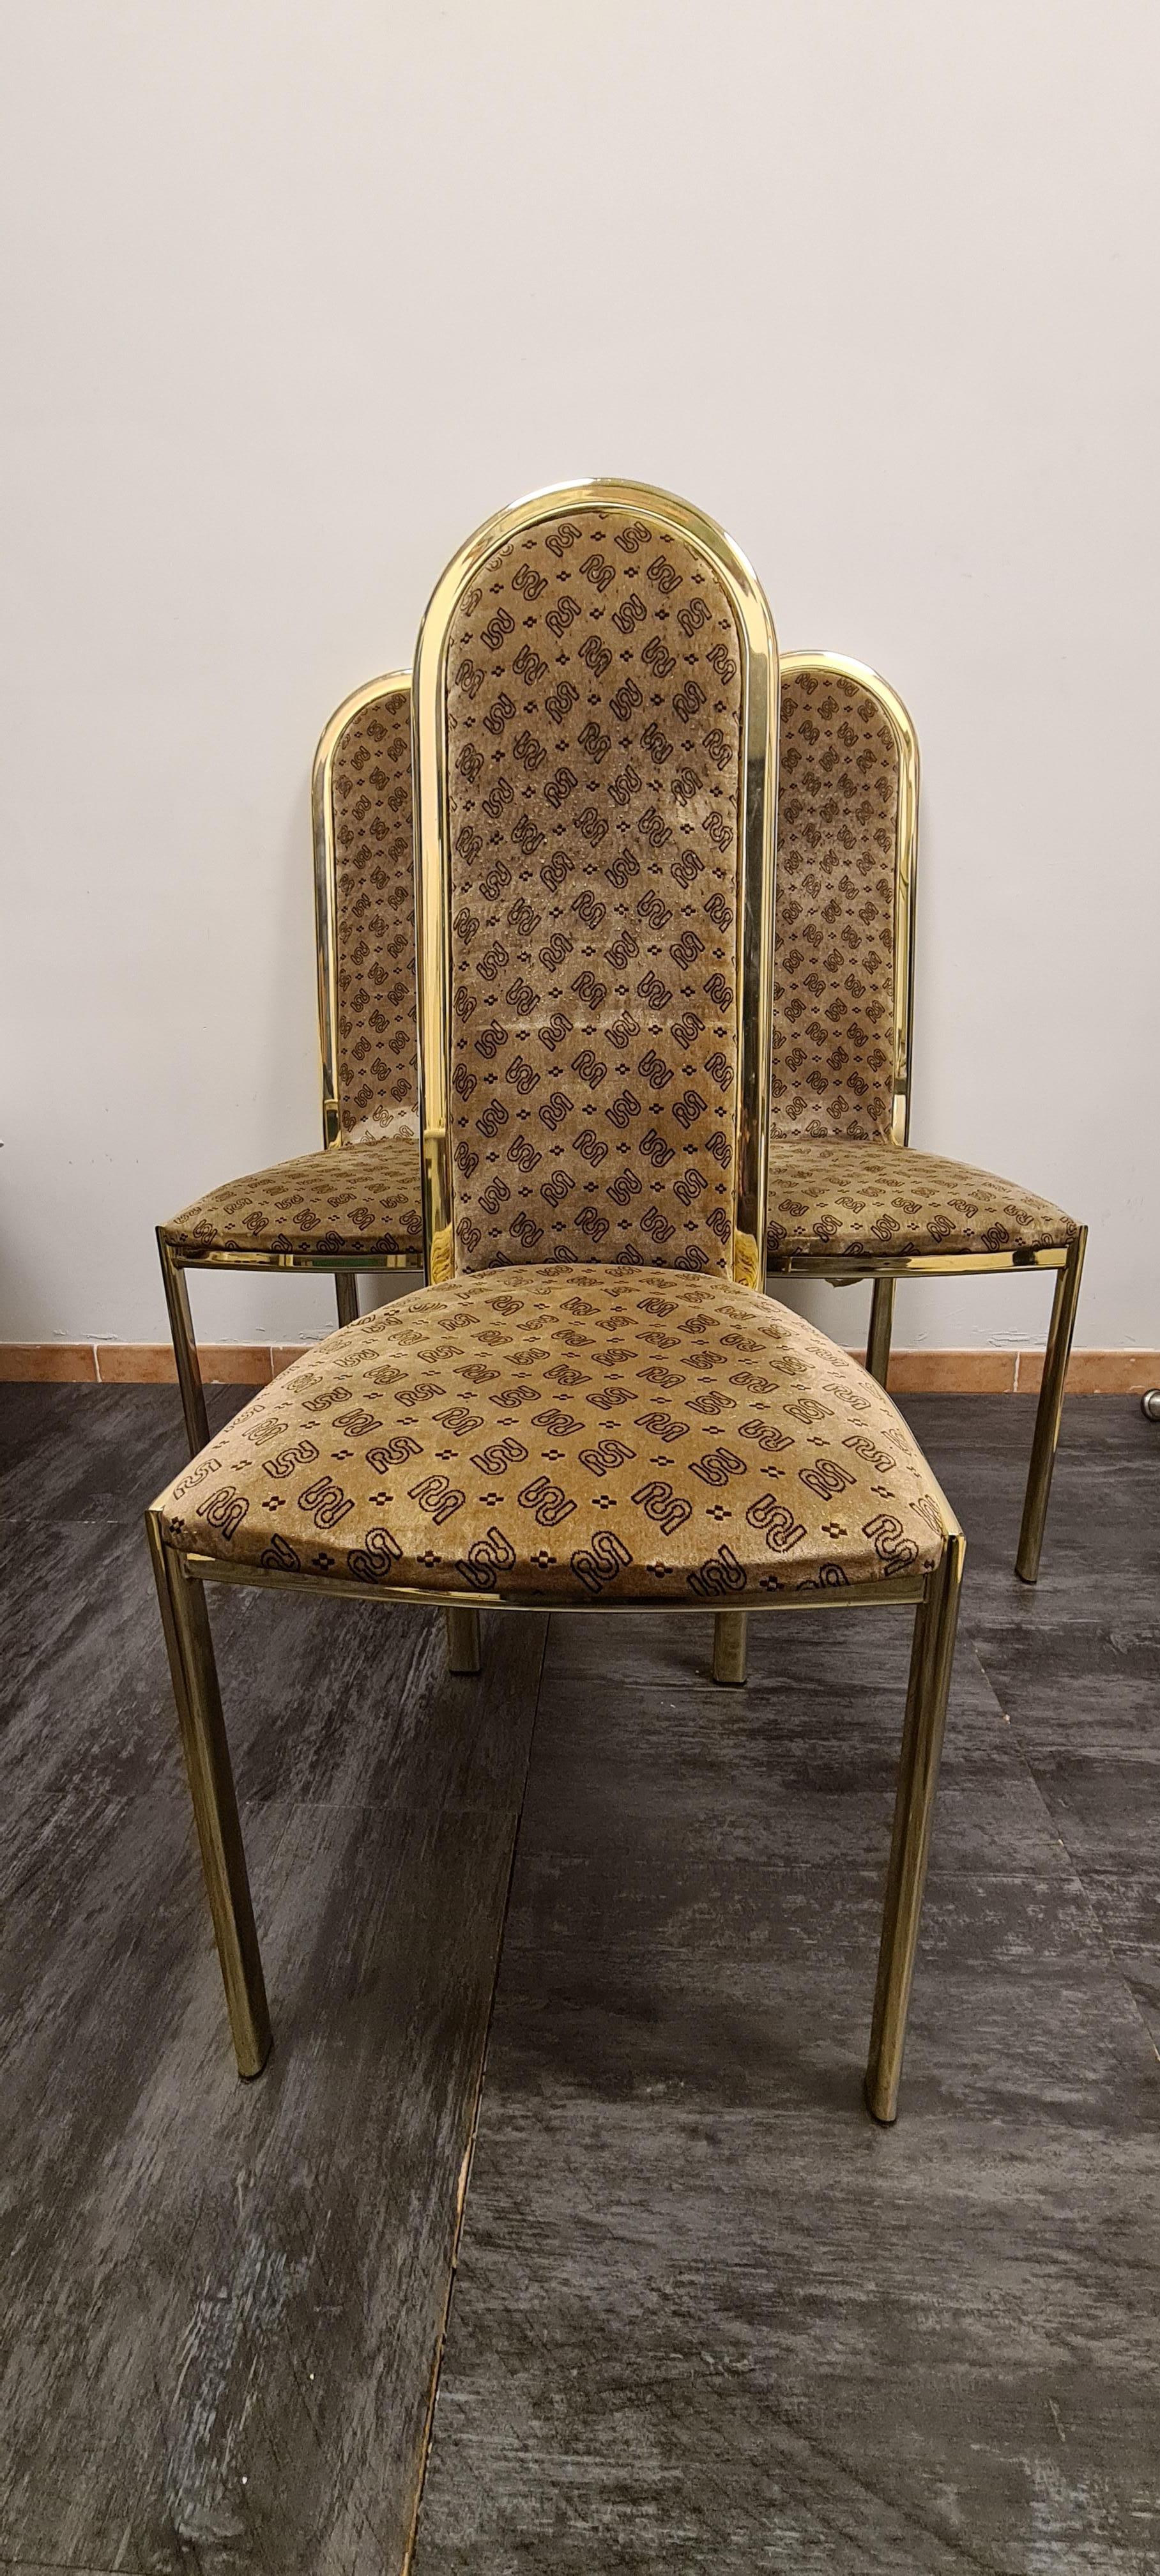 Italian 1970s gilded chairs from the Morex company